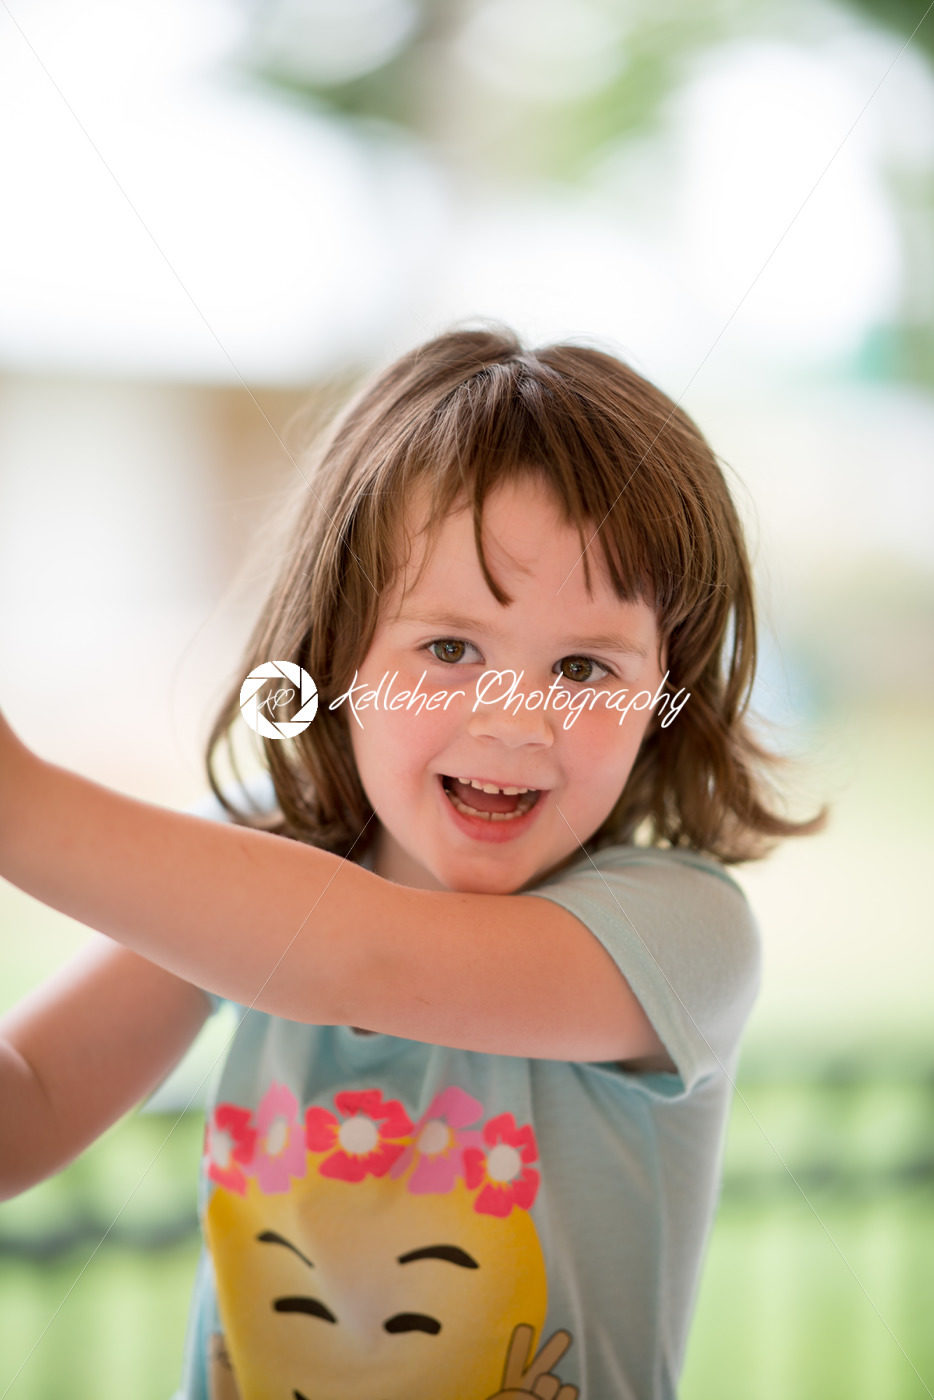 Young girl having fun outside at park on a playground - Kelleher Photography Store